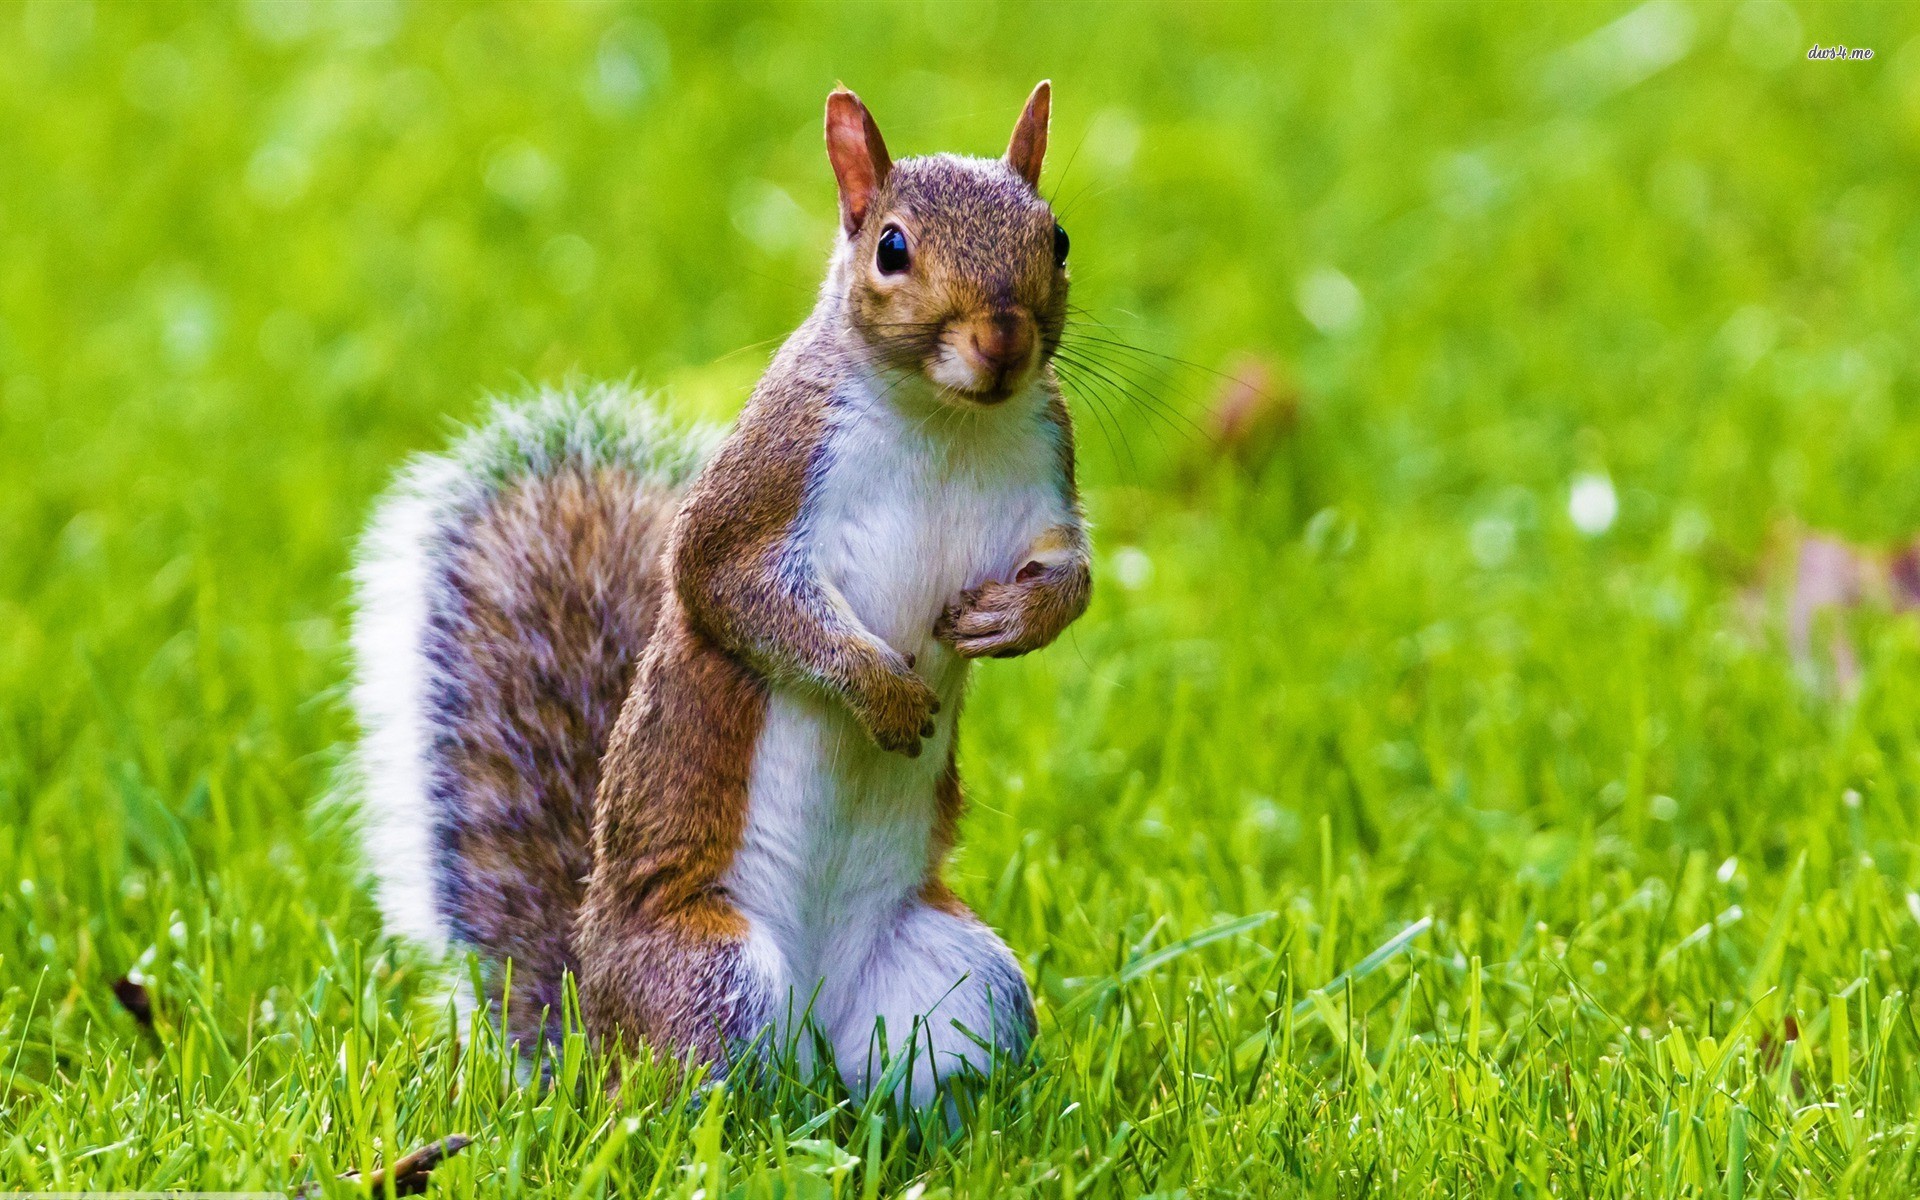 squirrel Full HD Wallpaper and Background Image | 1920x1200 | ID:506055